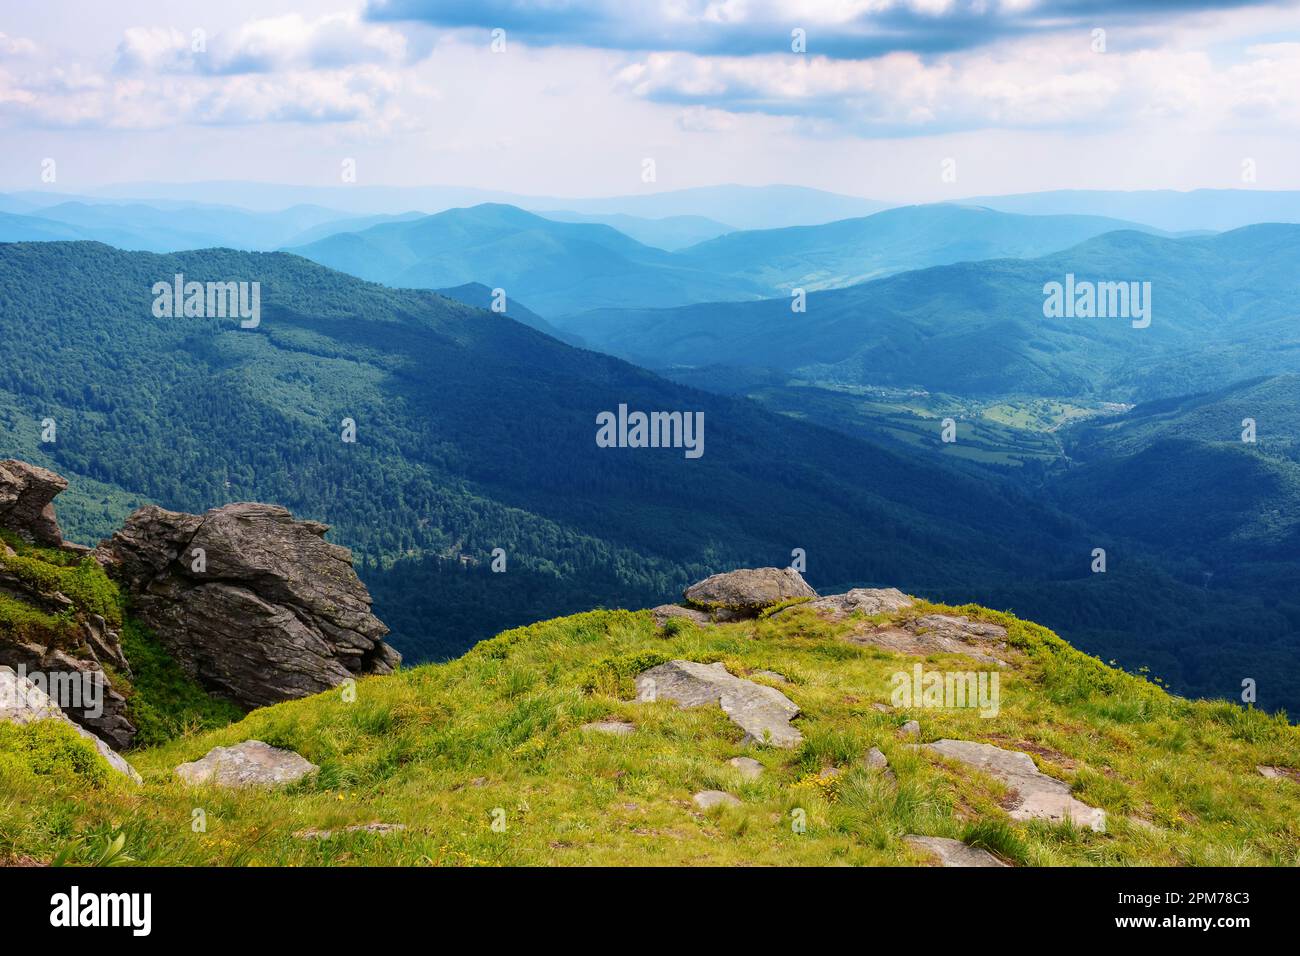 carpathian watershed ridge. stones and boulders on the green grassy hills. hot summer day Stock Photo